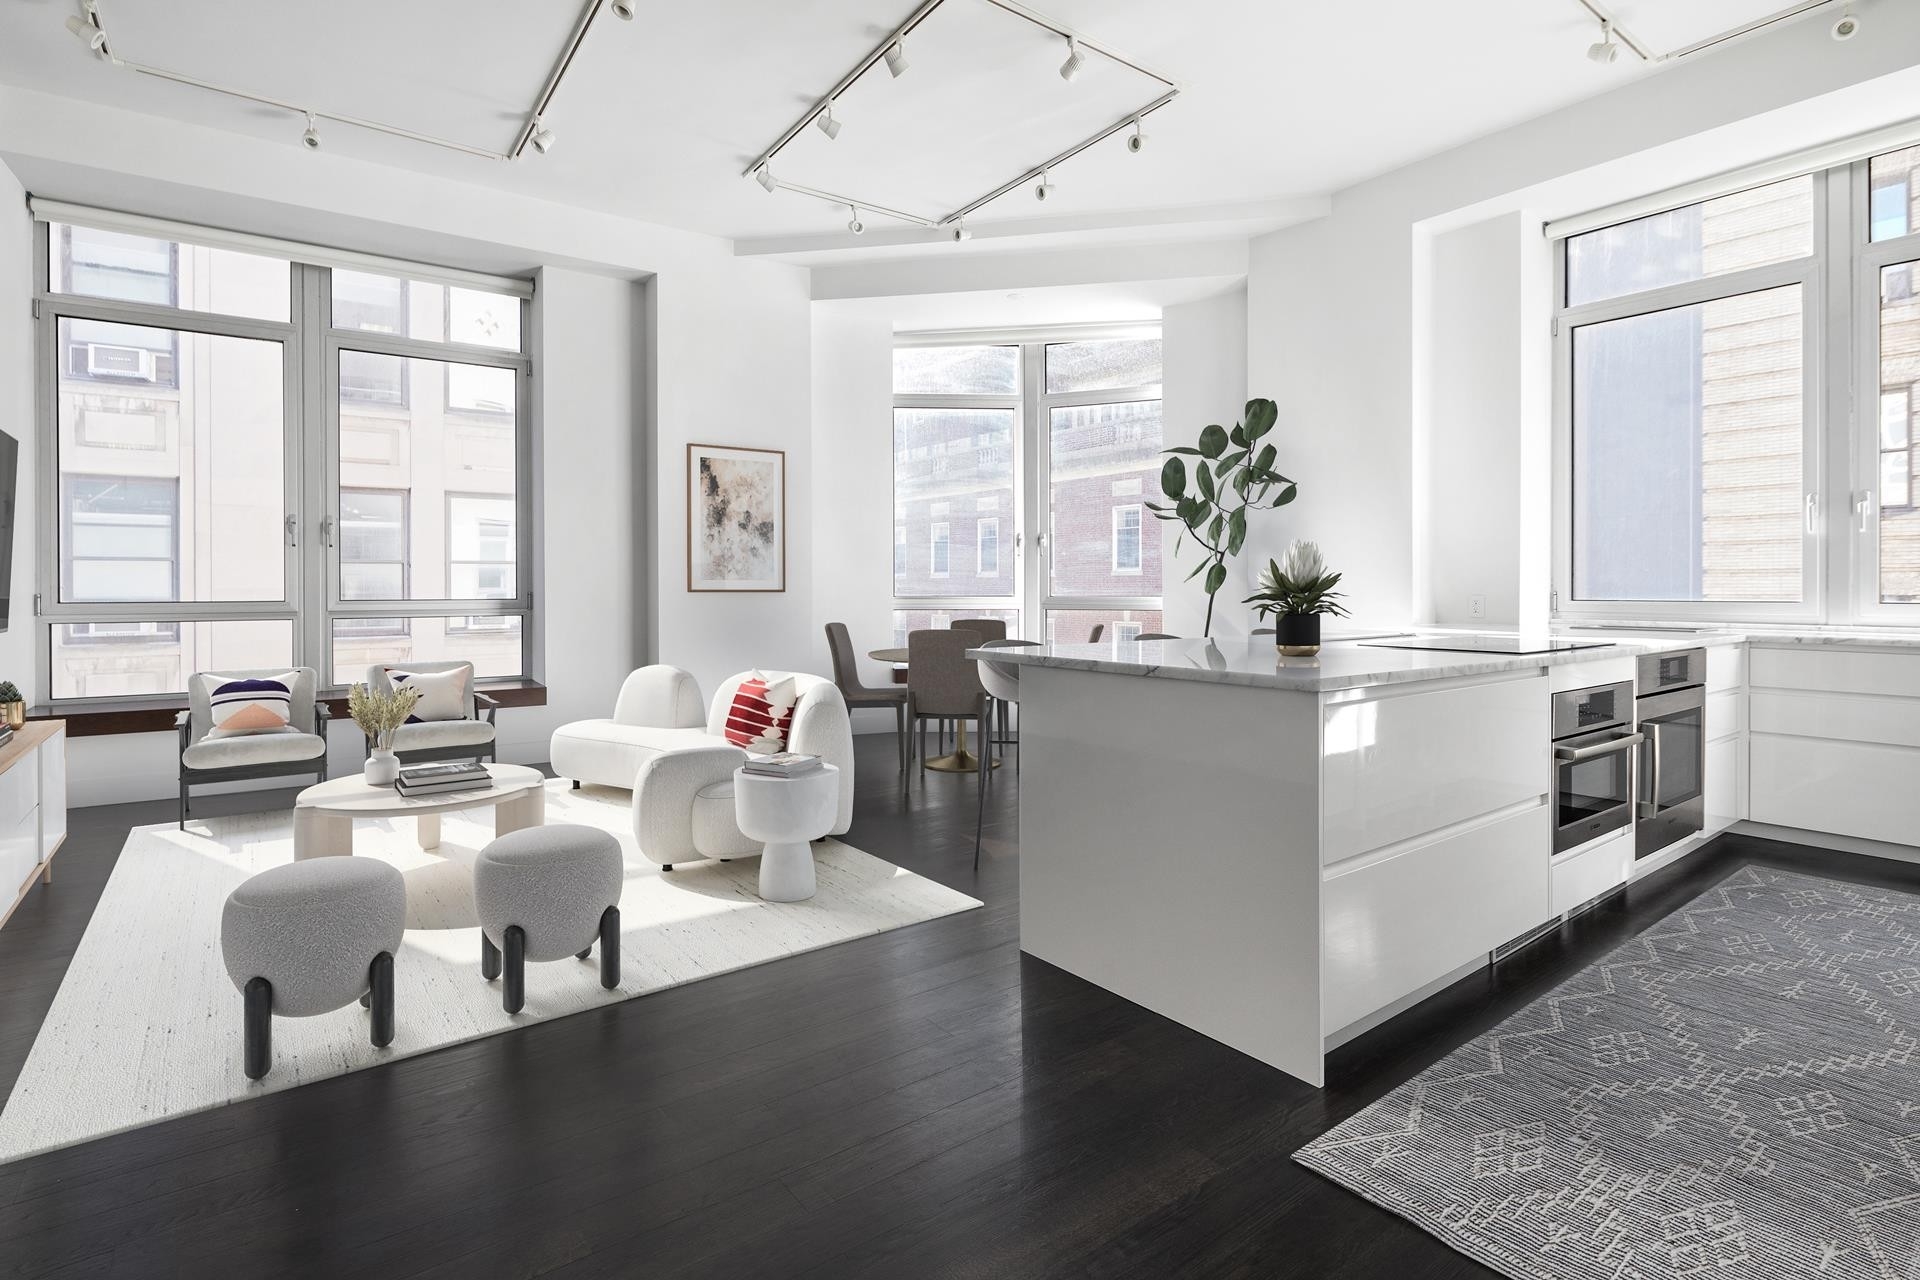 Condominium for Sale at District, 111 FULTON ST, 714 Financial District, New York, New York 10038